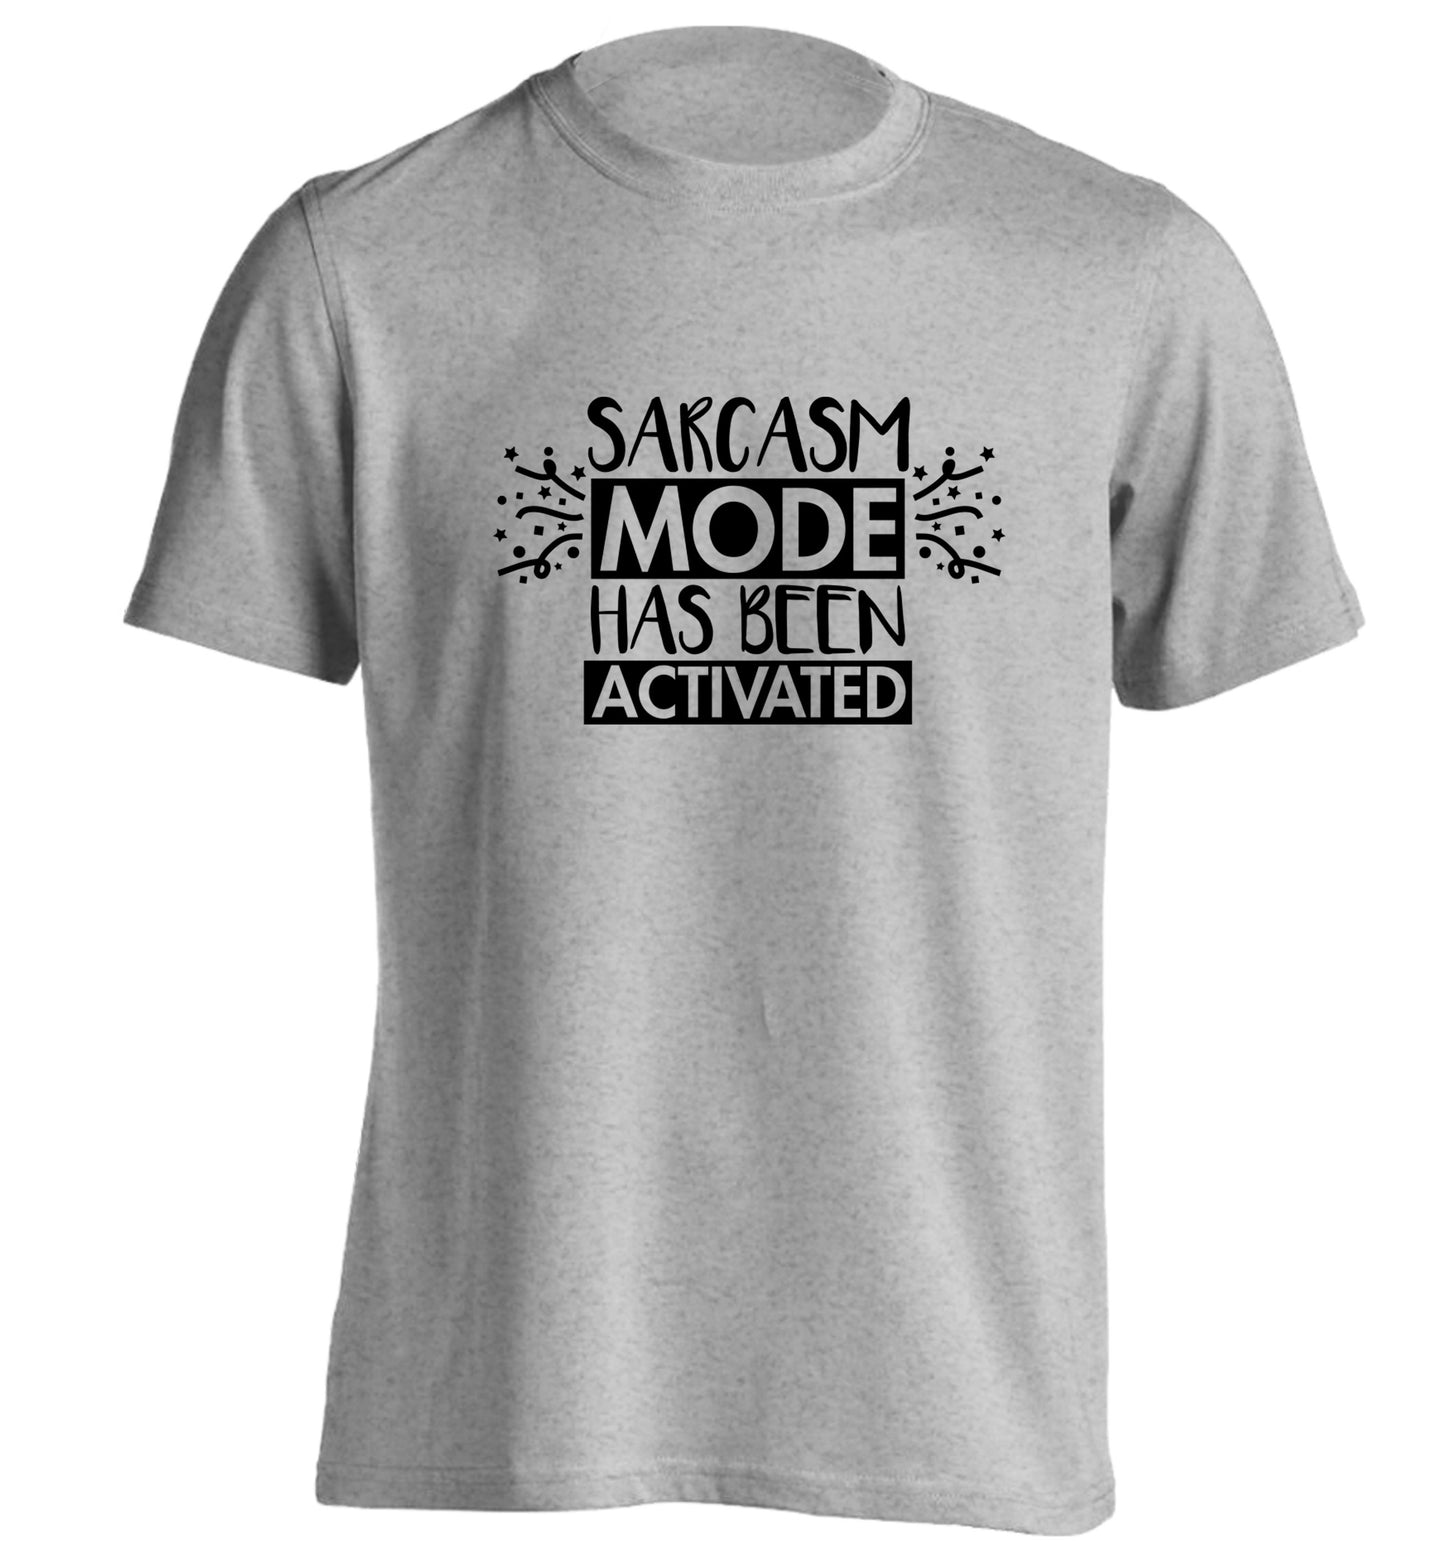 Sarcarsm mode has been activated adults unisex grey Tshirt 2XL